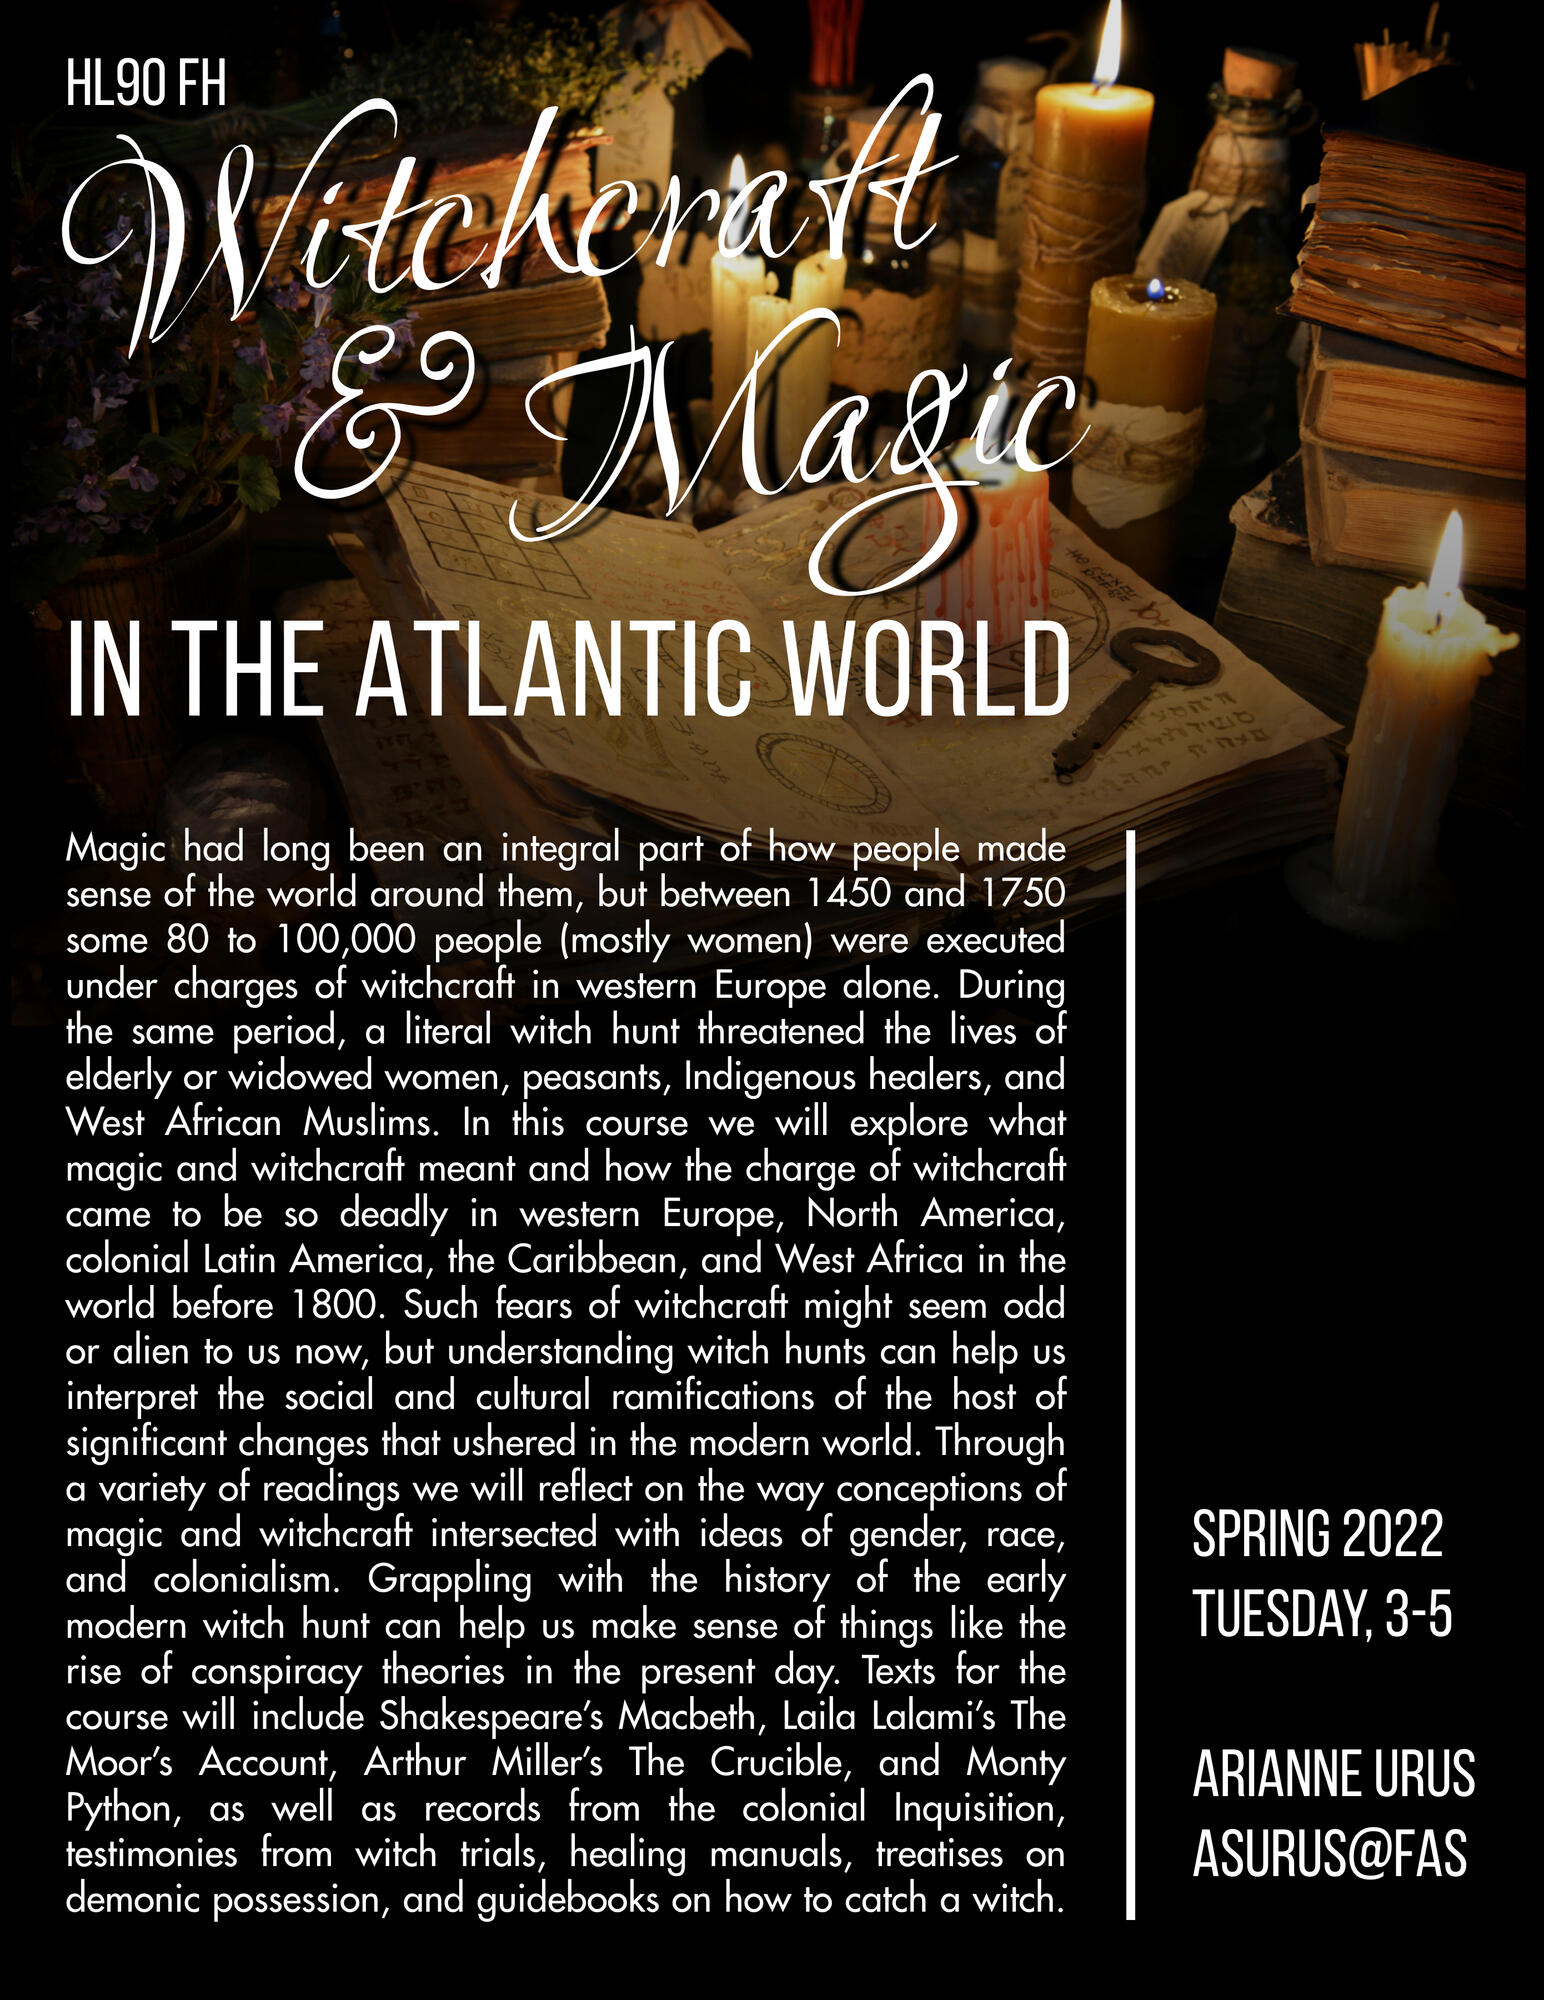 Witchcraft and Magic in the Atlantic World